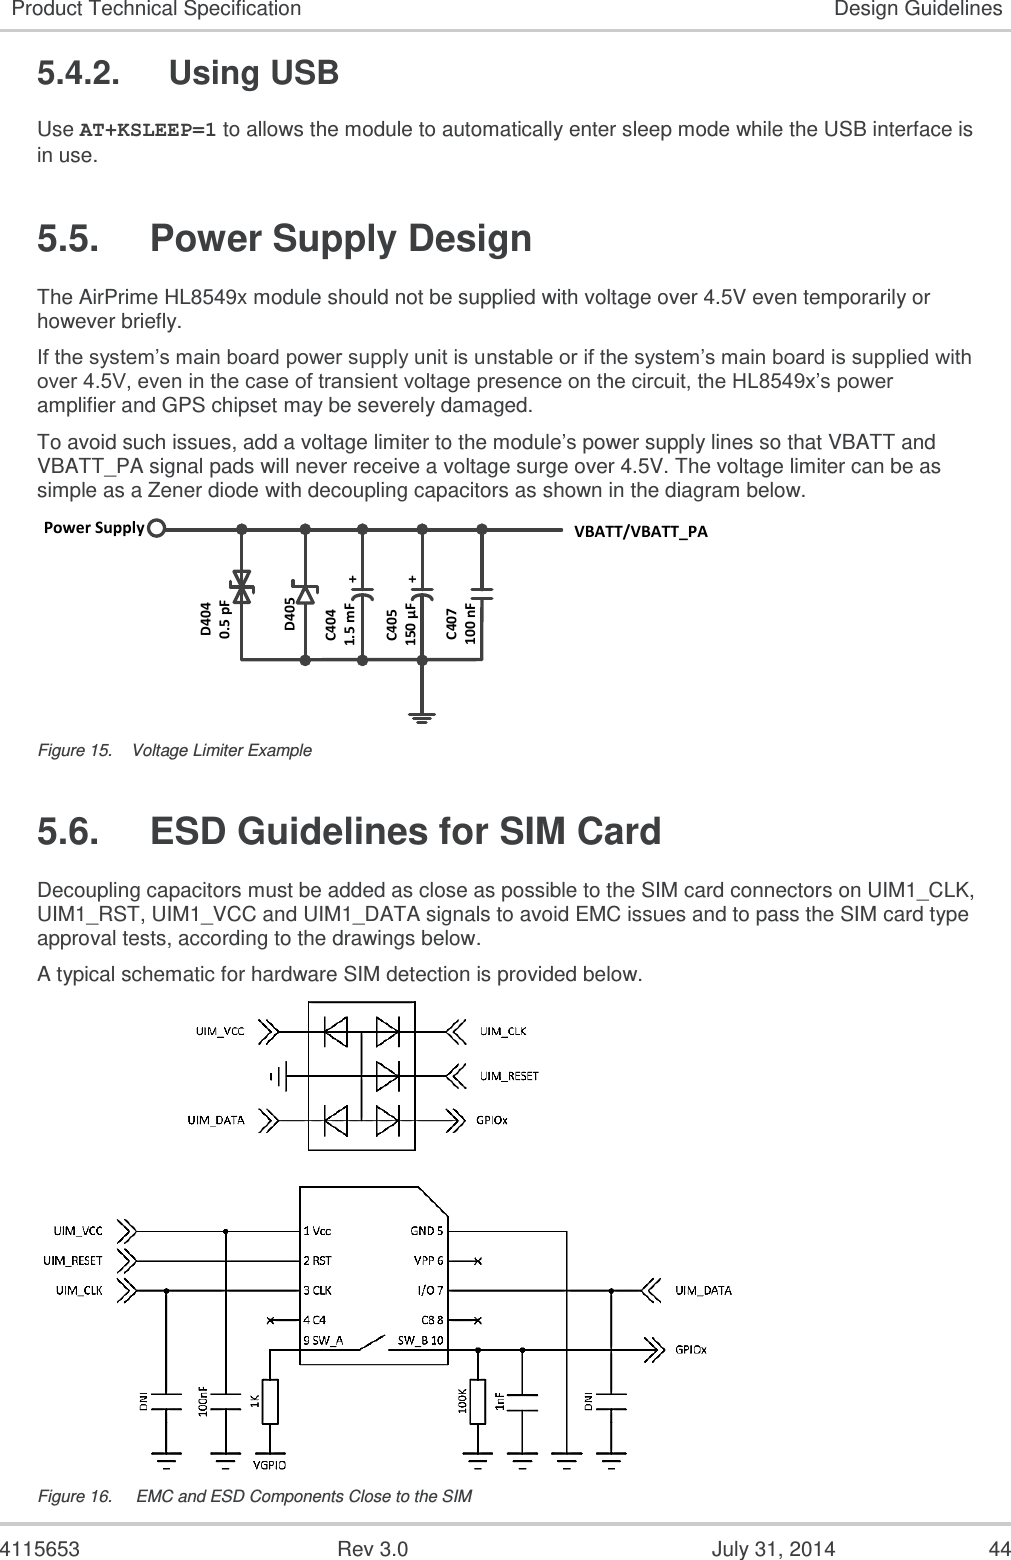  4115653  Rev 3.0  July 31, 2014  44 Product Technical Specification Design Guidelines 5.4.2.  Using USB Use AT+KSLEEP=1 to allows the module to automatically enter sleep mode while the USB interface is in use. 5.5.  Power Supply Design The AirPrime HL8549x module should not be supplied with voltage over 4.5V even temporarily or however briefly. If the system’s main board power supply unit is unstable or if the system’s main board is supplied with over 4.5V, even in the case of transient voltage presence on the circuit, the HL8549x’s power amplifier and GPS chipset may be severely damaged. To avoid such issues, add a voltage limiter to the module’s power supply lines so that VBATT and VBATT_PA signal pads will never receive a voltage surge over 4.5V. The voltage limiter can be as simple as a Zener diode with decoupling capacitors as shown in the diagram below. Power Supply VBATT/VBATT_PAD4040.5 pFD405C4041.5 mF ++C405150 µFC407100 nF Figure 15.  Voltage Limiter Example 5.6.  ESD Guidelines for SIM Card Decoupling capacitors must be added as close as possible to the SIM card connectors on UIM1_CLK, UIM1_RST, UIM1_VCC and UIM1_DATA signals to avoid EMC issues and to pass the SIM card type approval tests, according to the drawings below. A typical schematic for hardware SIM detection is provided below.  Figure 16.   EMC and ESD Components Close to the SIM 